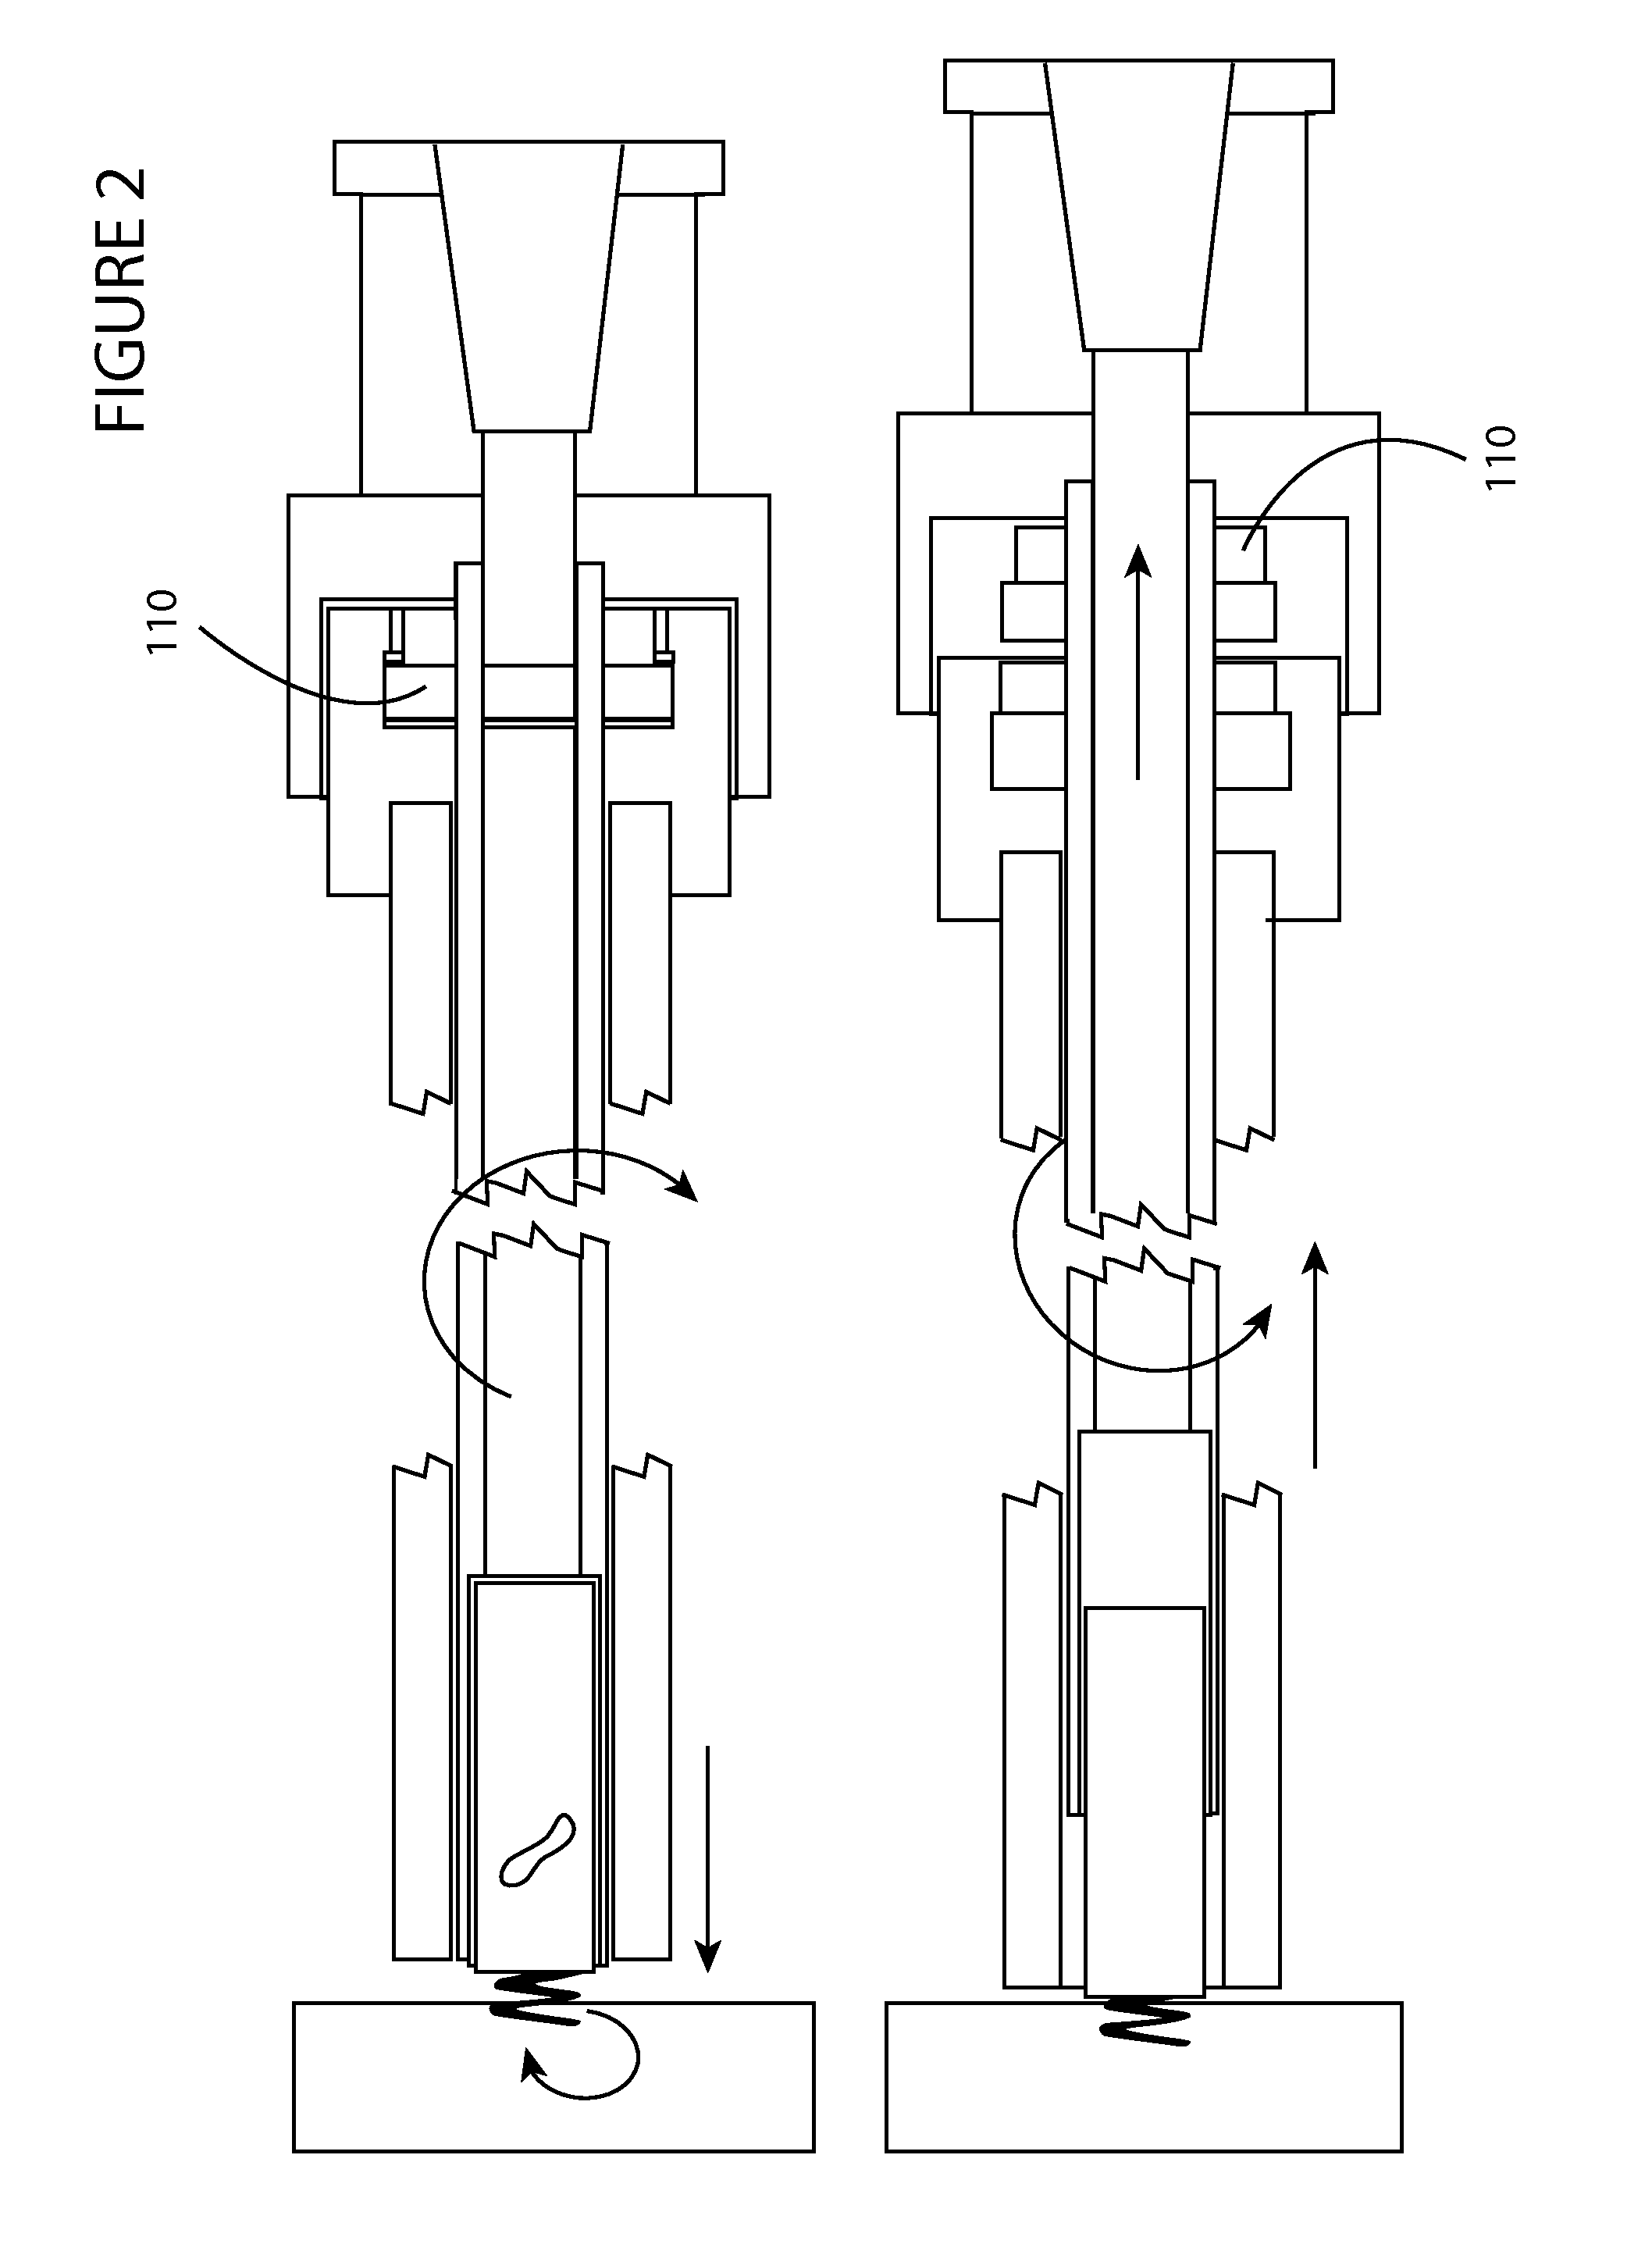 Leadless implantable device delivery apparatus